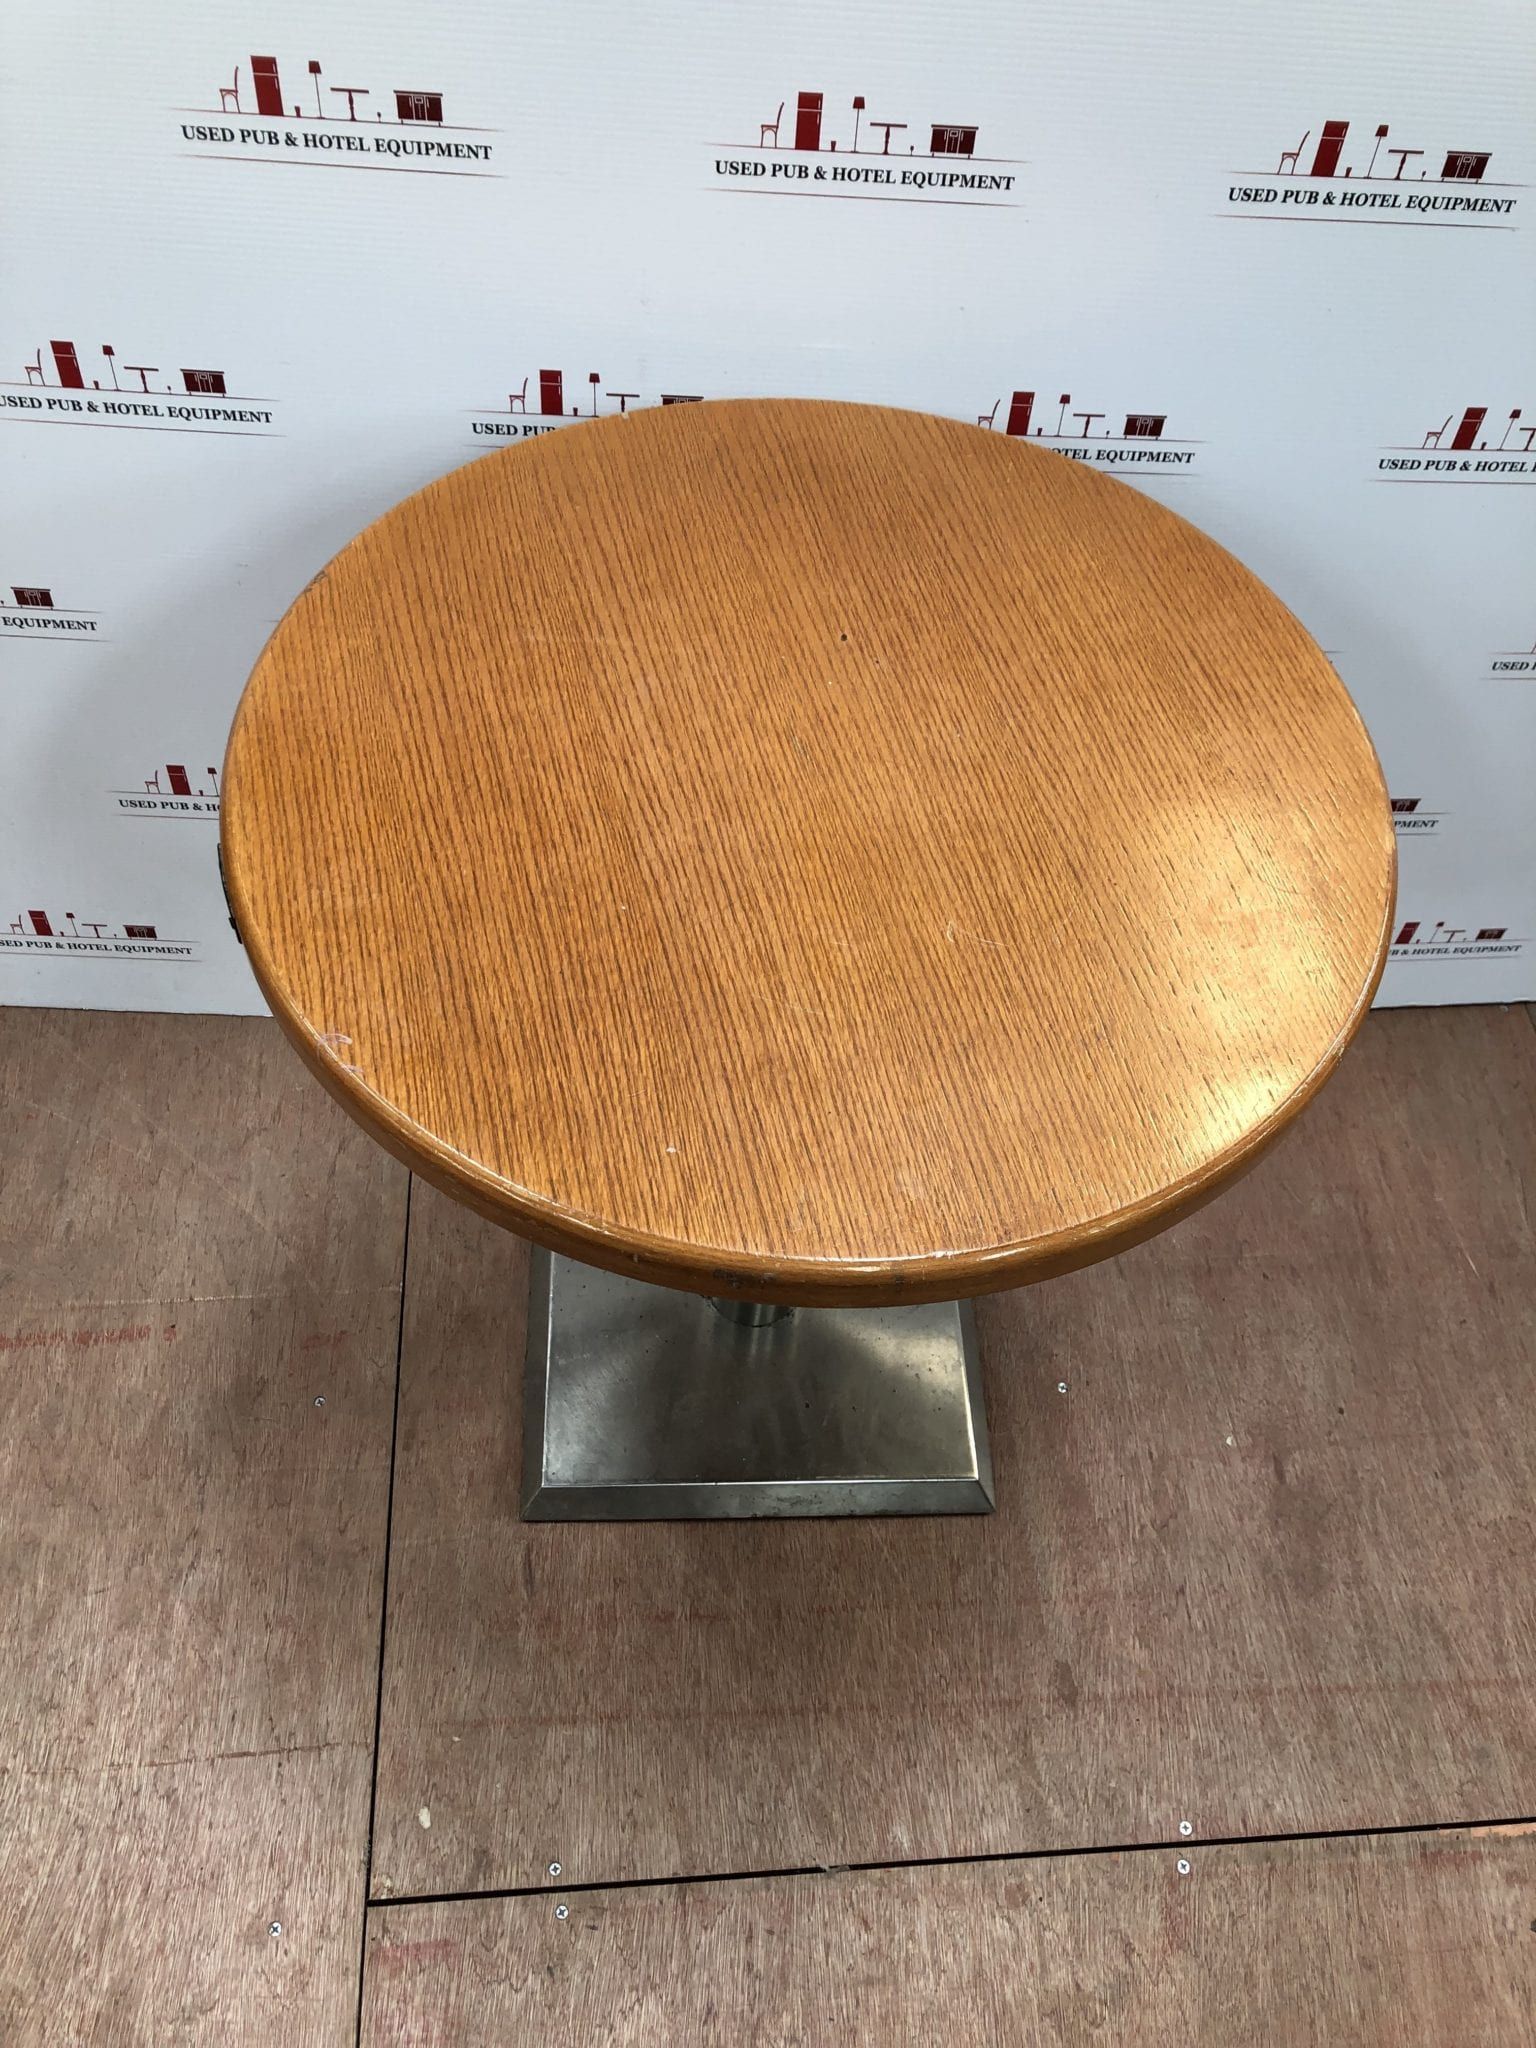 Oak Round Table With Square Steel Base – Used Pub And Hotel Equipment Regarding Metal Legs And Oak Top Round Console Tables (View 7 of 20)